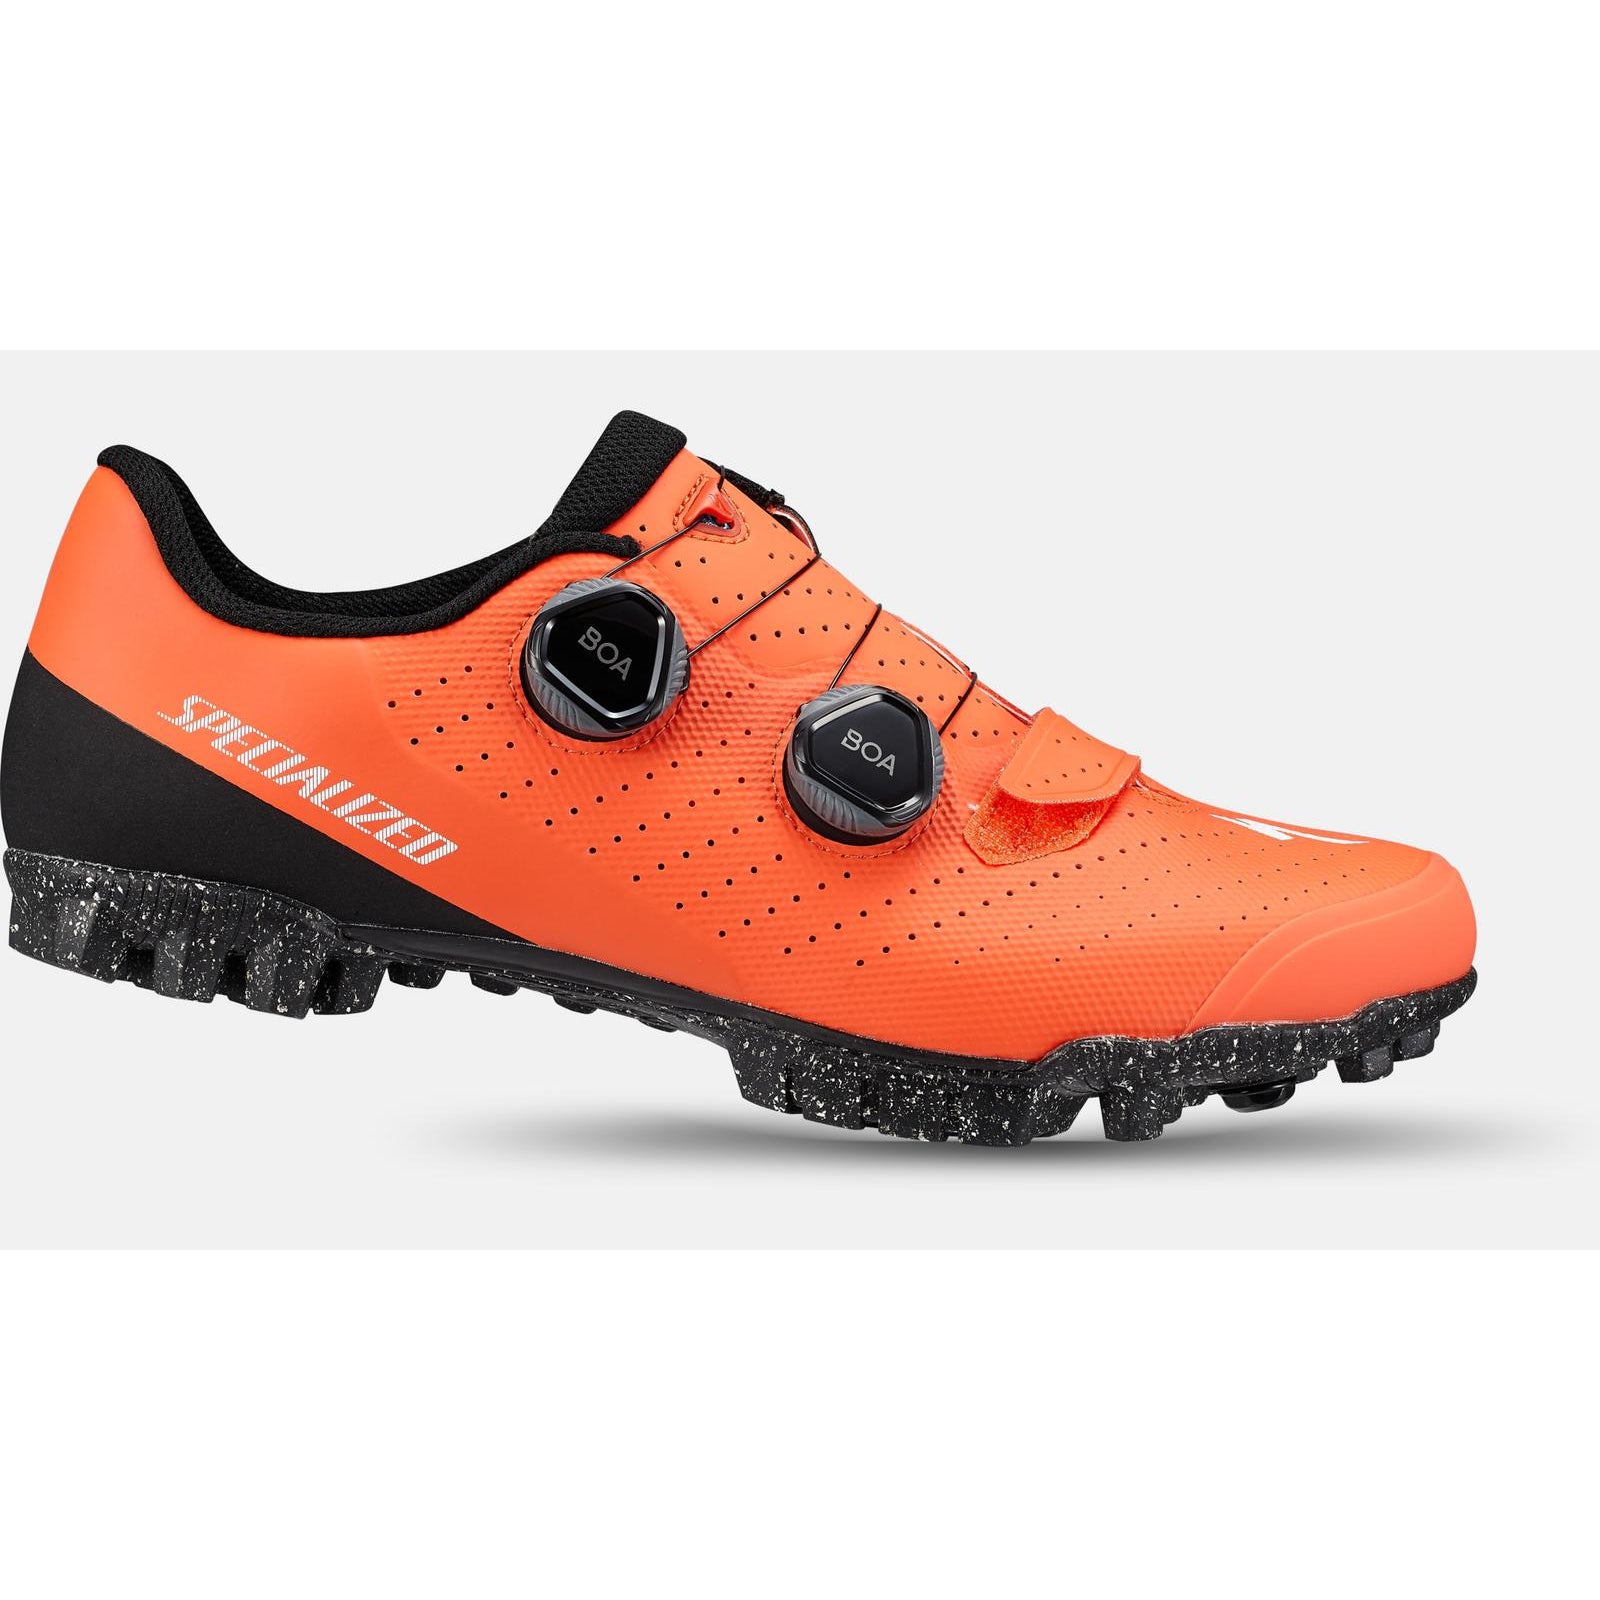 Specialized Recon 3.0 Mountain Bike Shoes - Shoes - Bicycle Warehouse